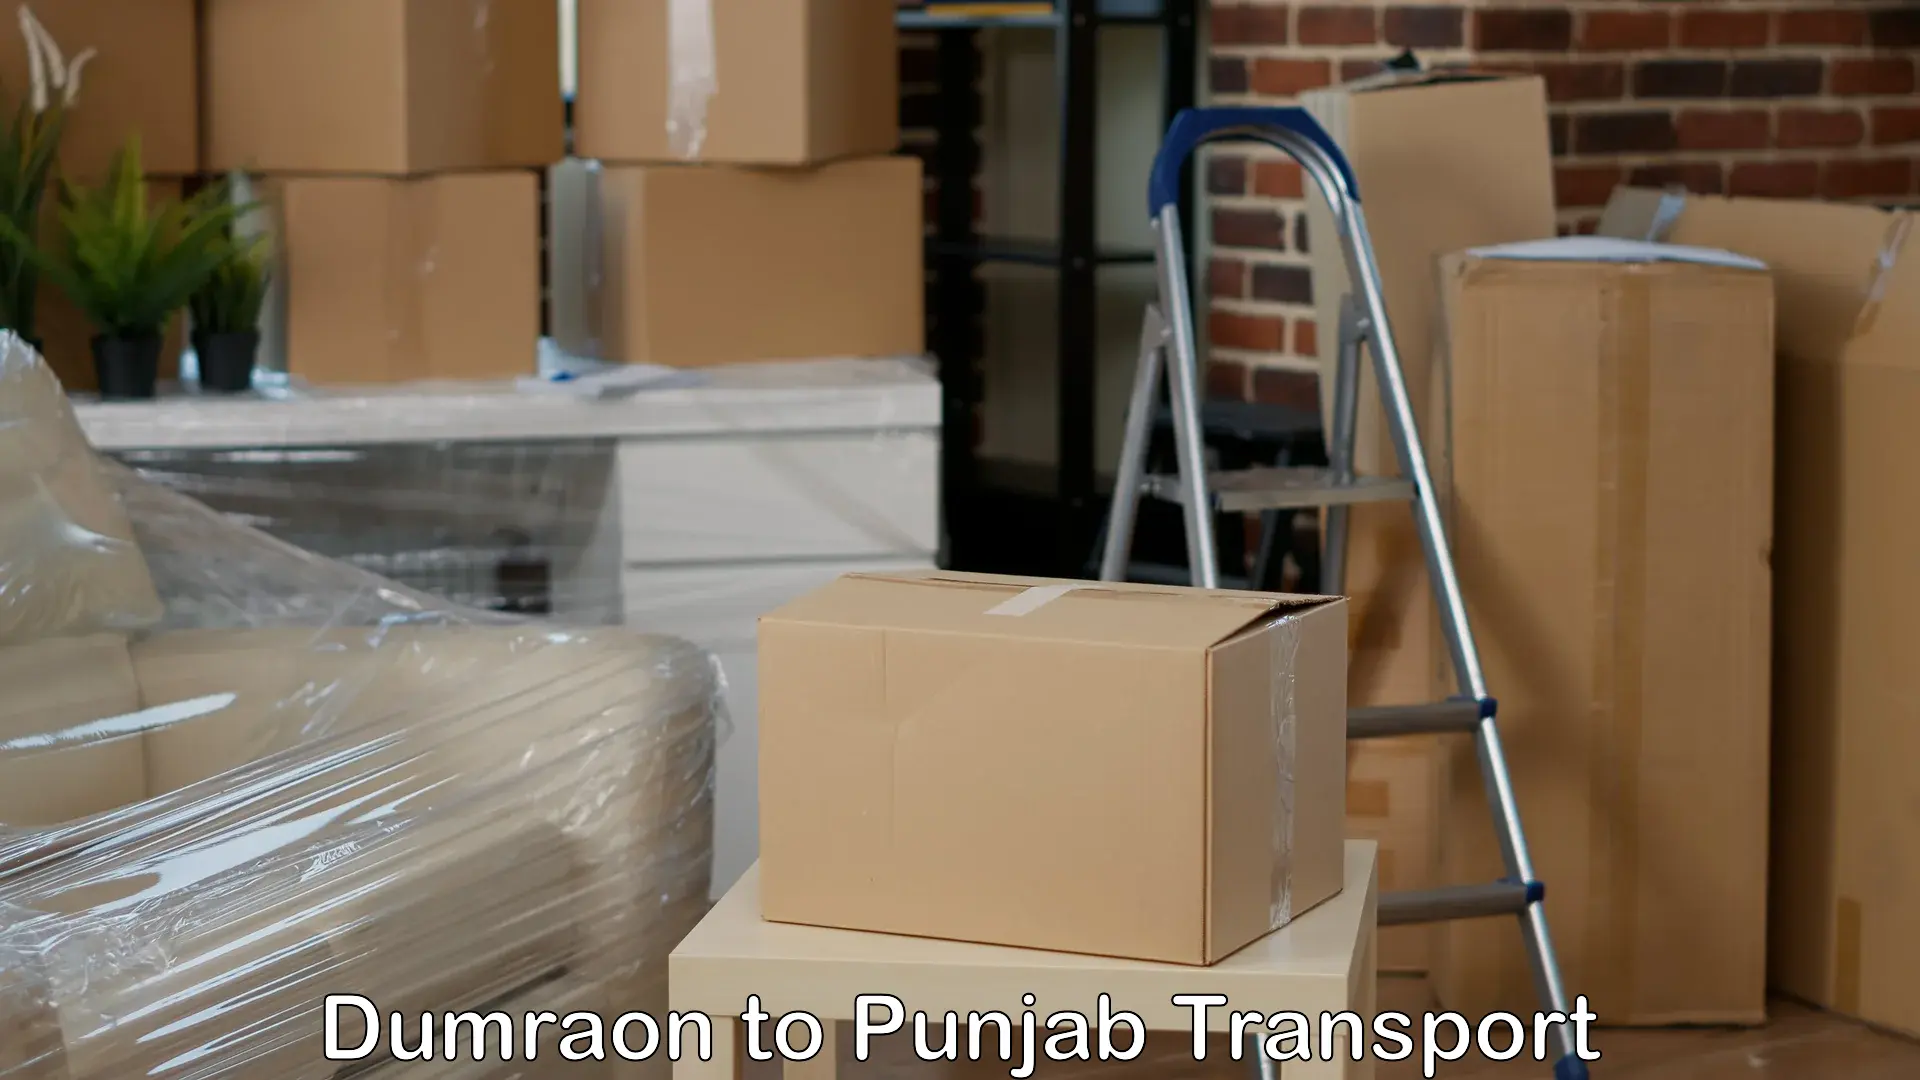 Transport bike from one state to another Dumraon to Mohali